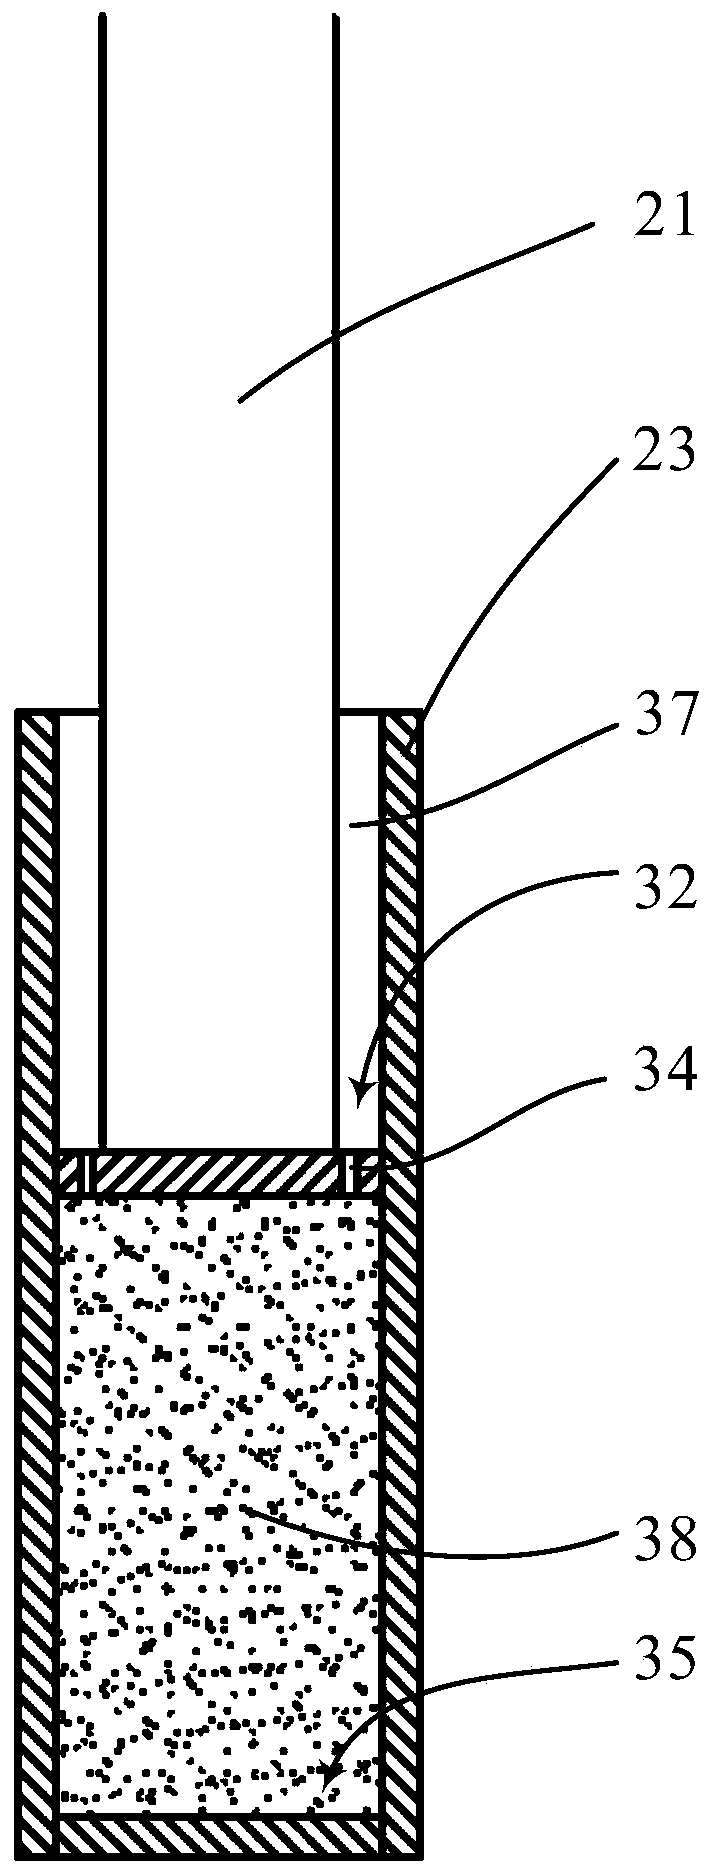 Mudstone sample, device and method for reshaping mudstone sample using cuttings